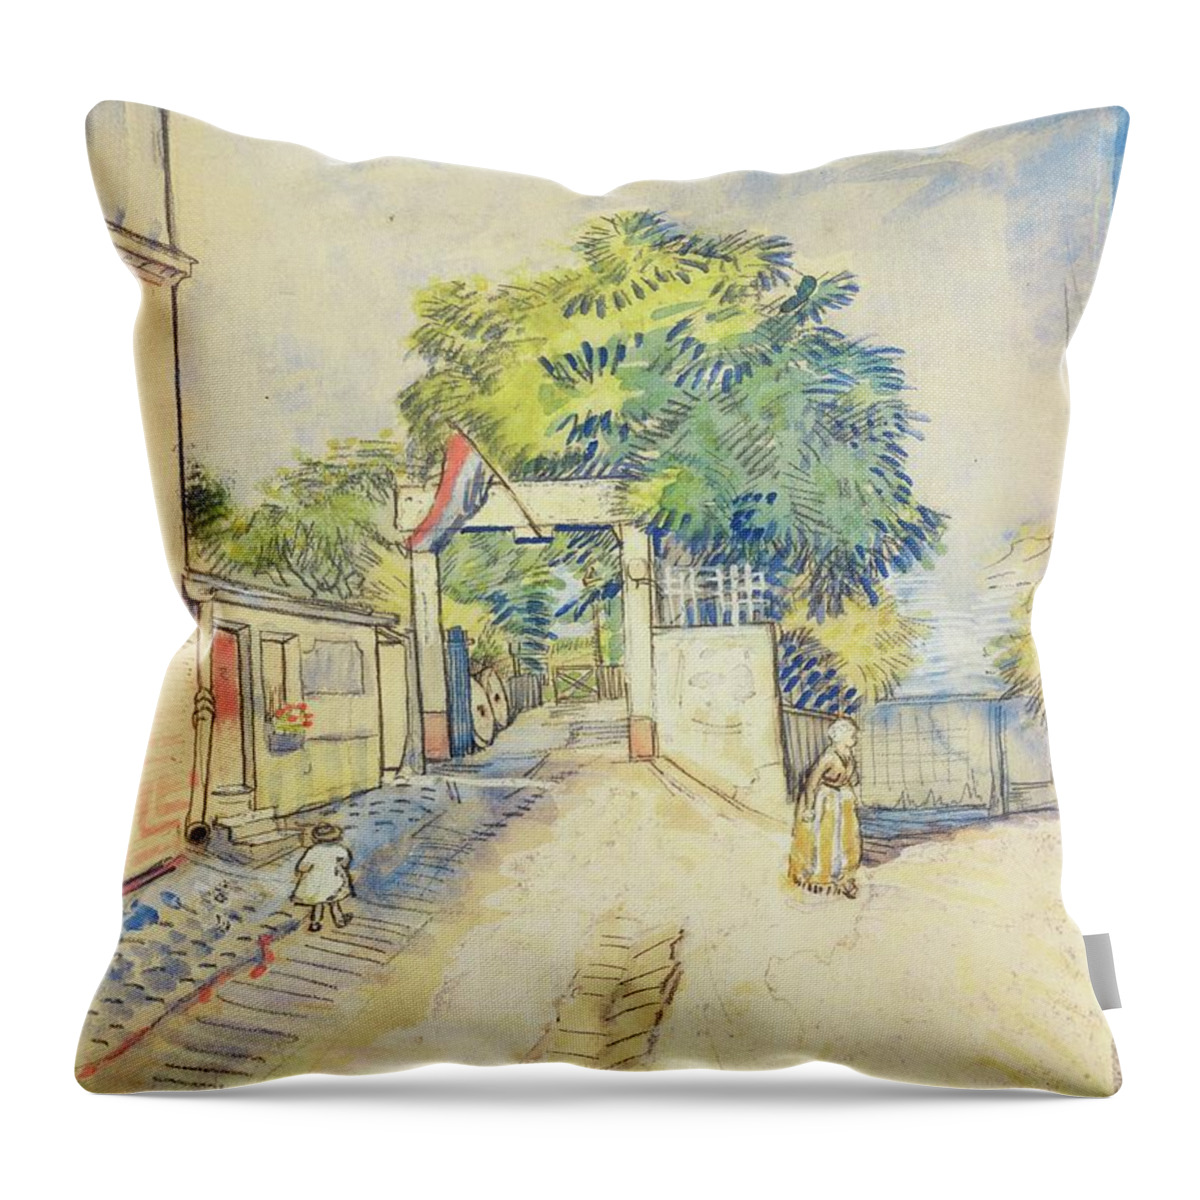 Entrance To The Moulin De La Galette Paris Throw Pillow featuring the painting Entrance to the Moulin de la Galette Paris by MotionAge Designs